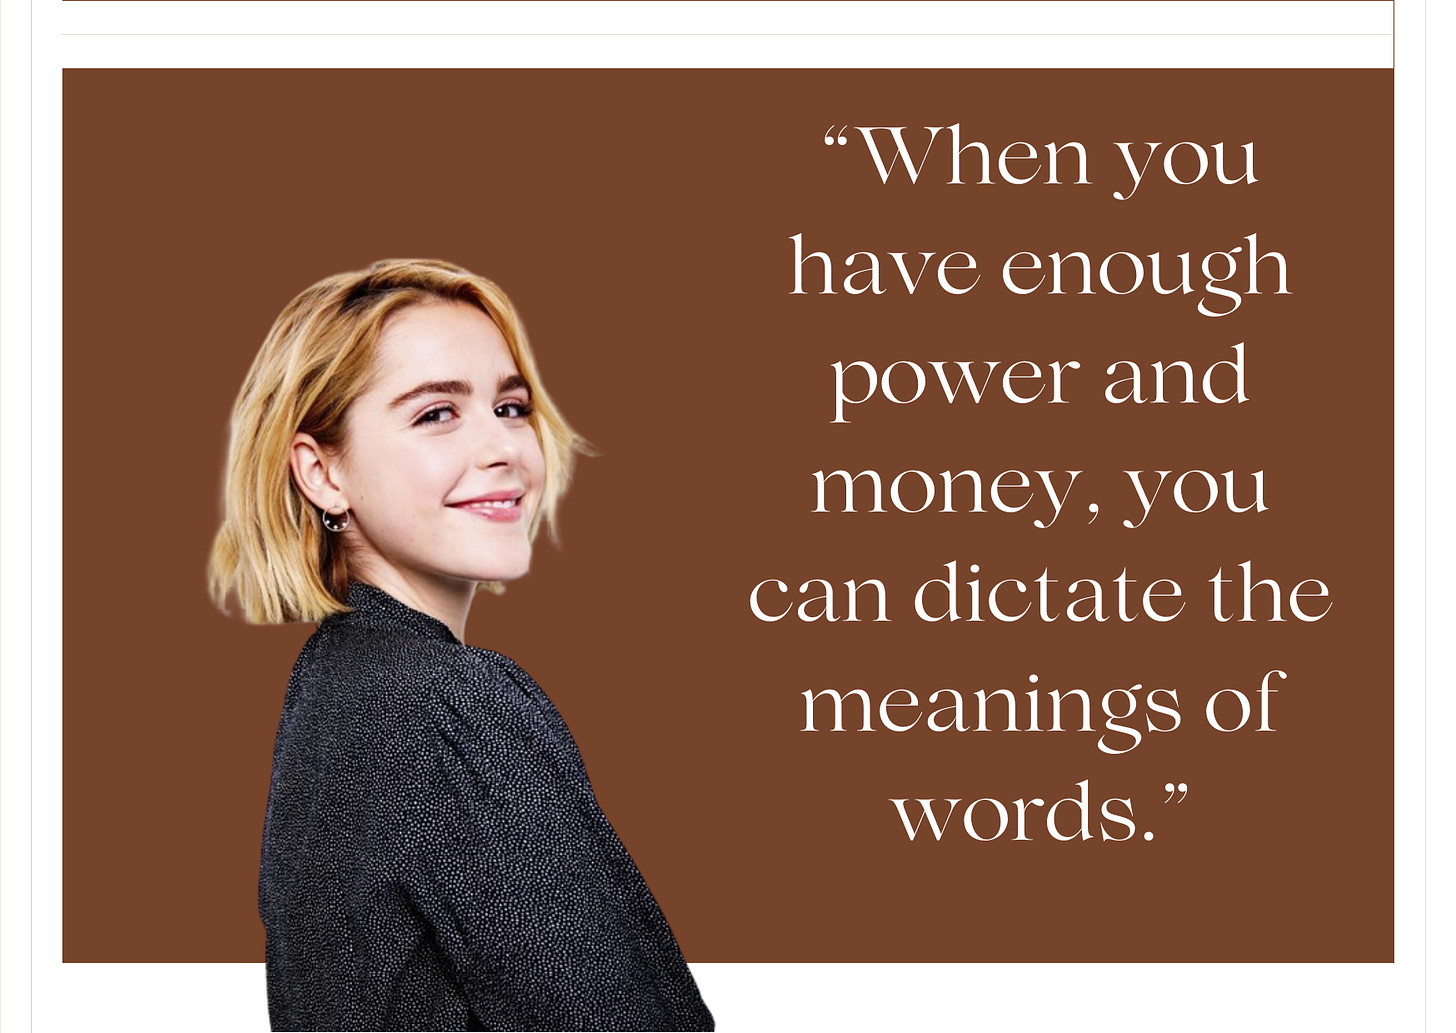 Stevie Bell from the Truly Devious series quotes Kiernan Shipka